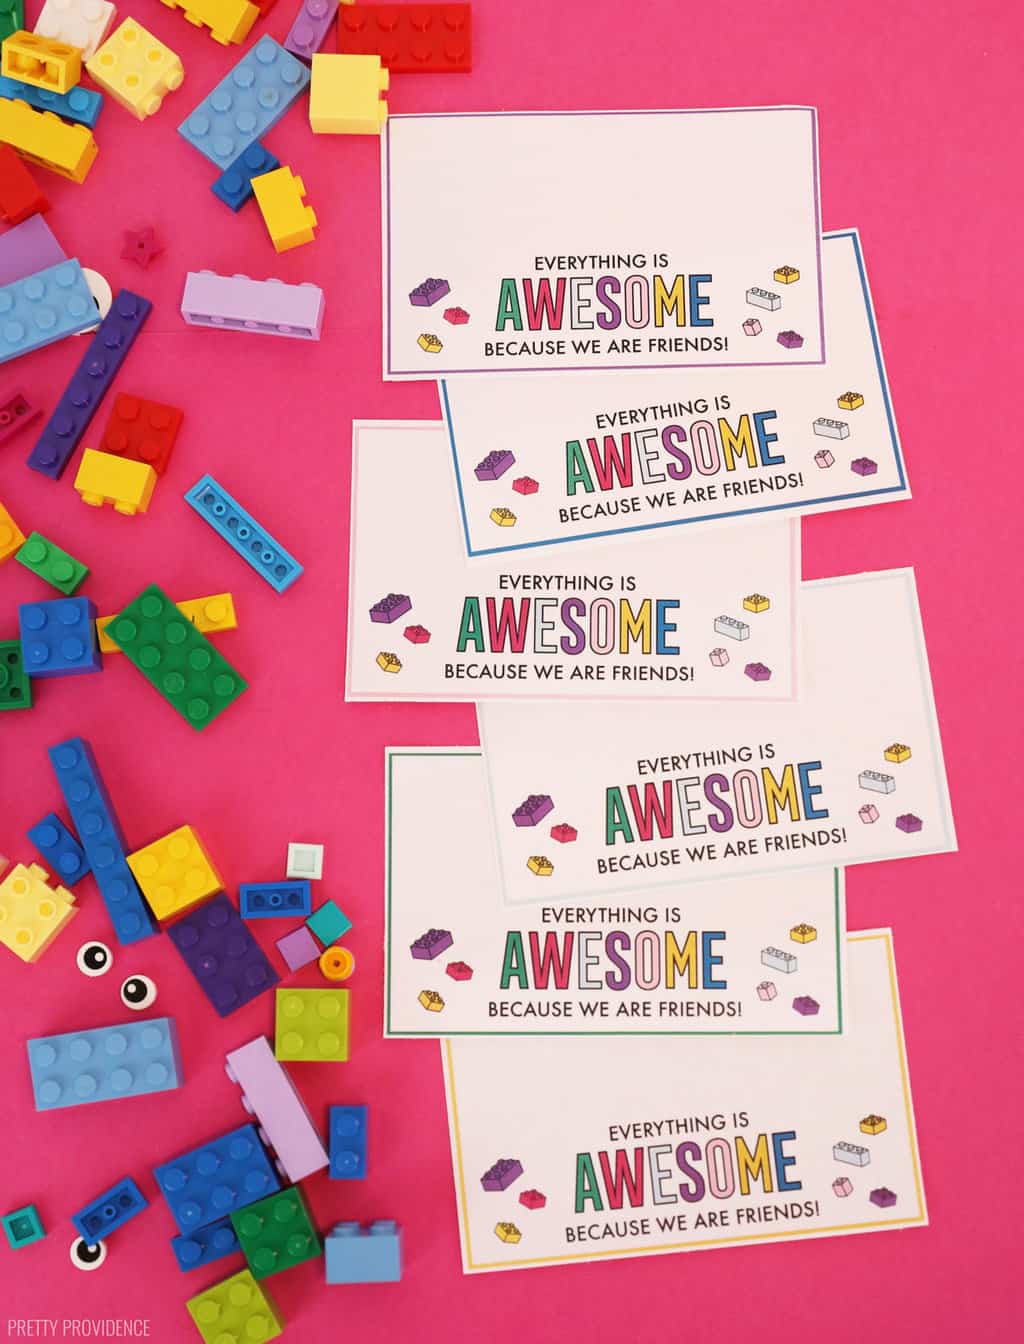 Lego Valentines for kids that say 'Everything is Awesome because we are friends.'